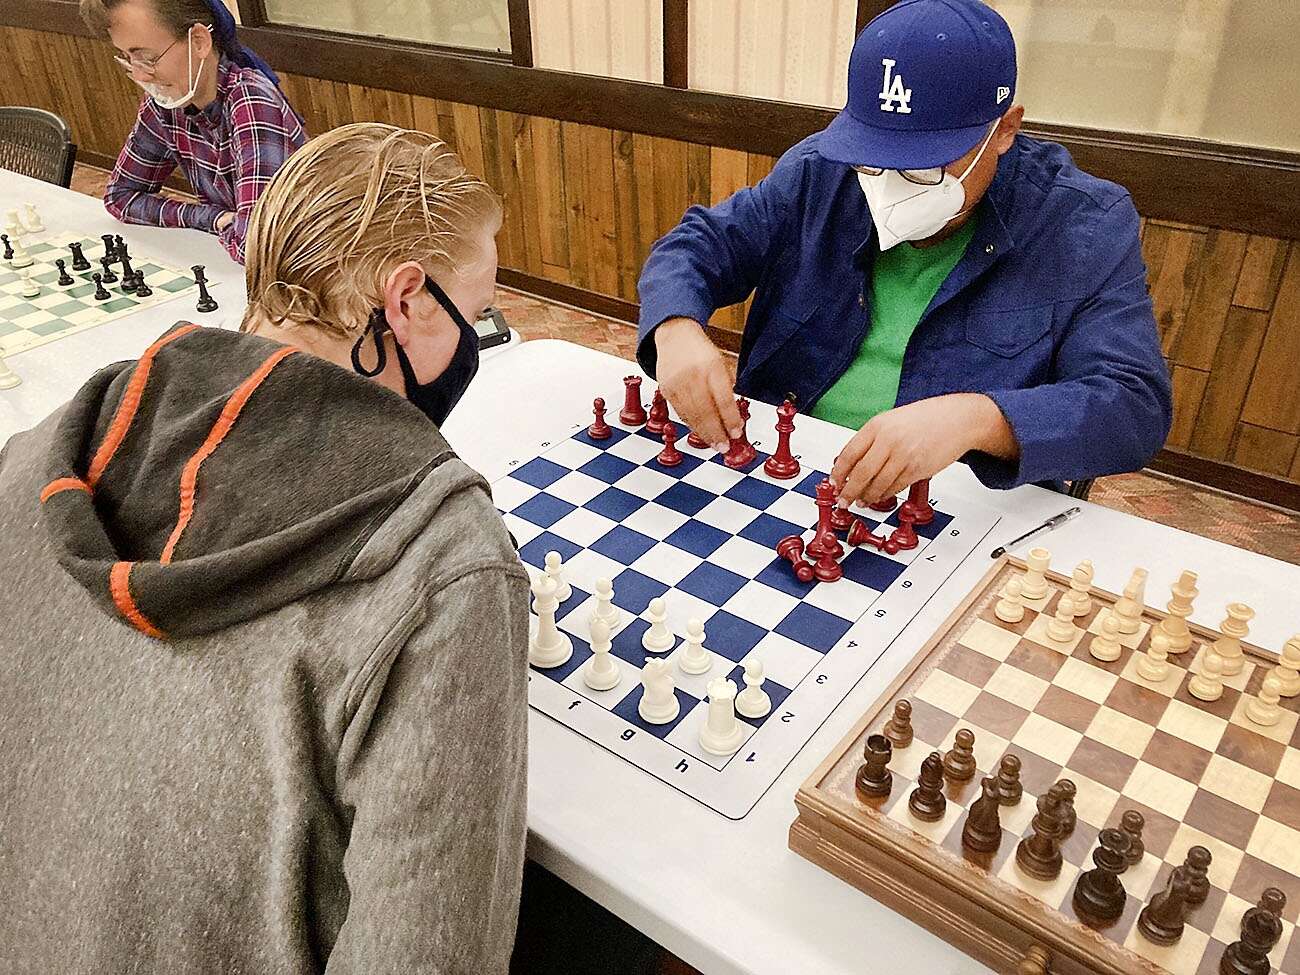 Who are some chess players that did something amazing outside of